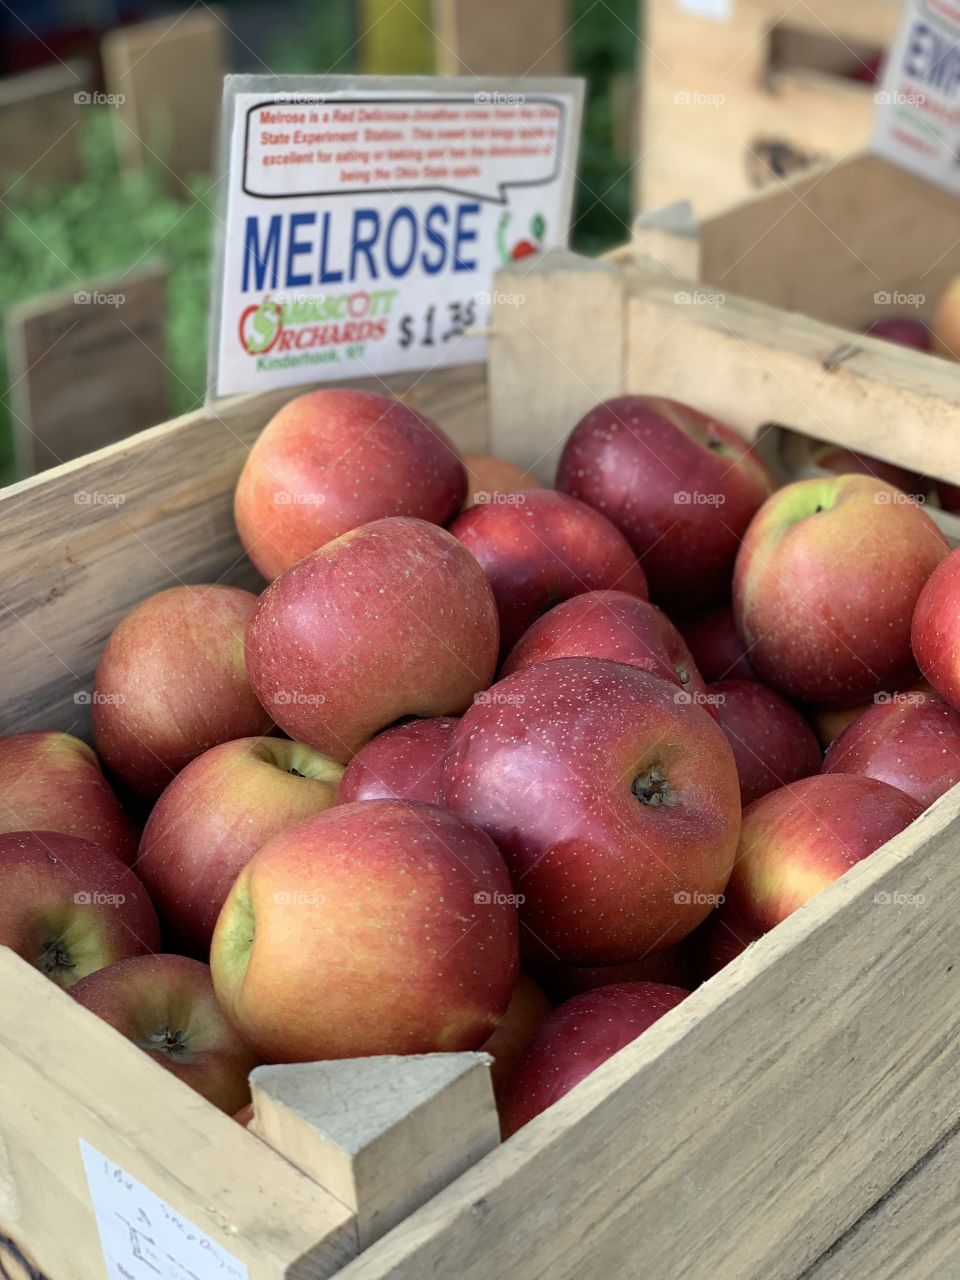 Melrose apples in a wooded create at the farmers market 